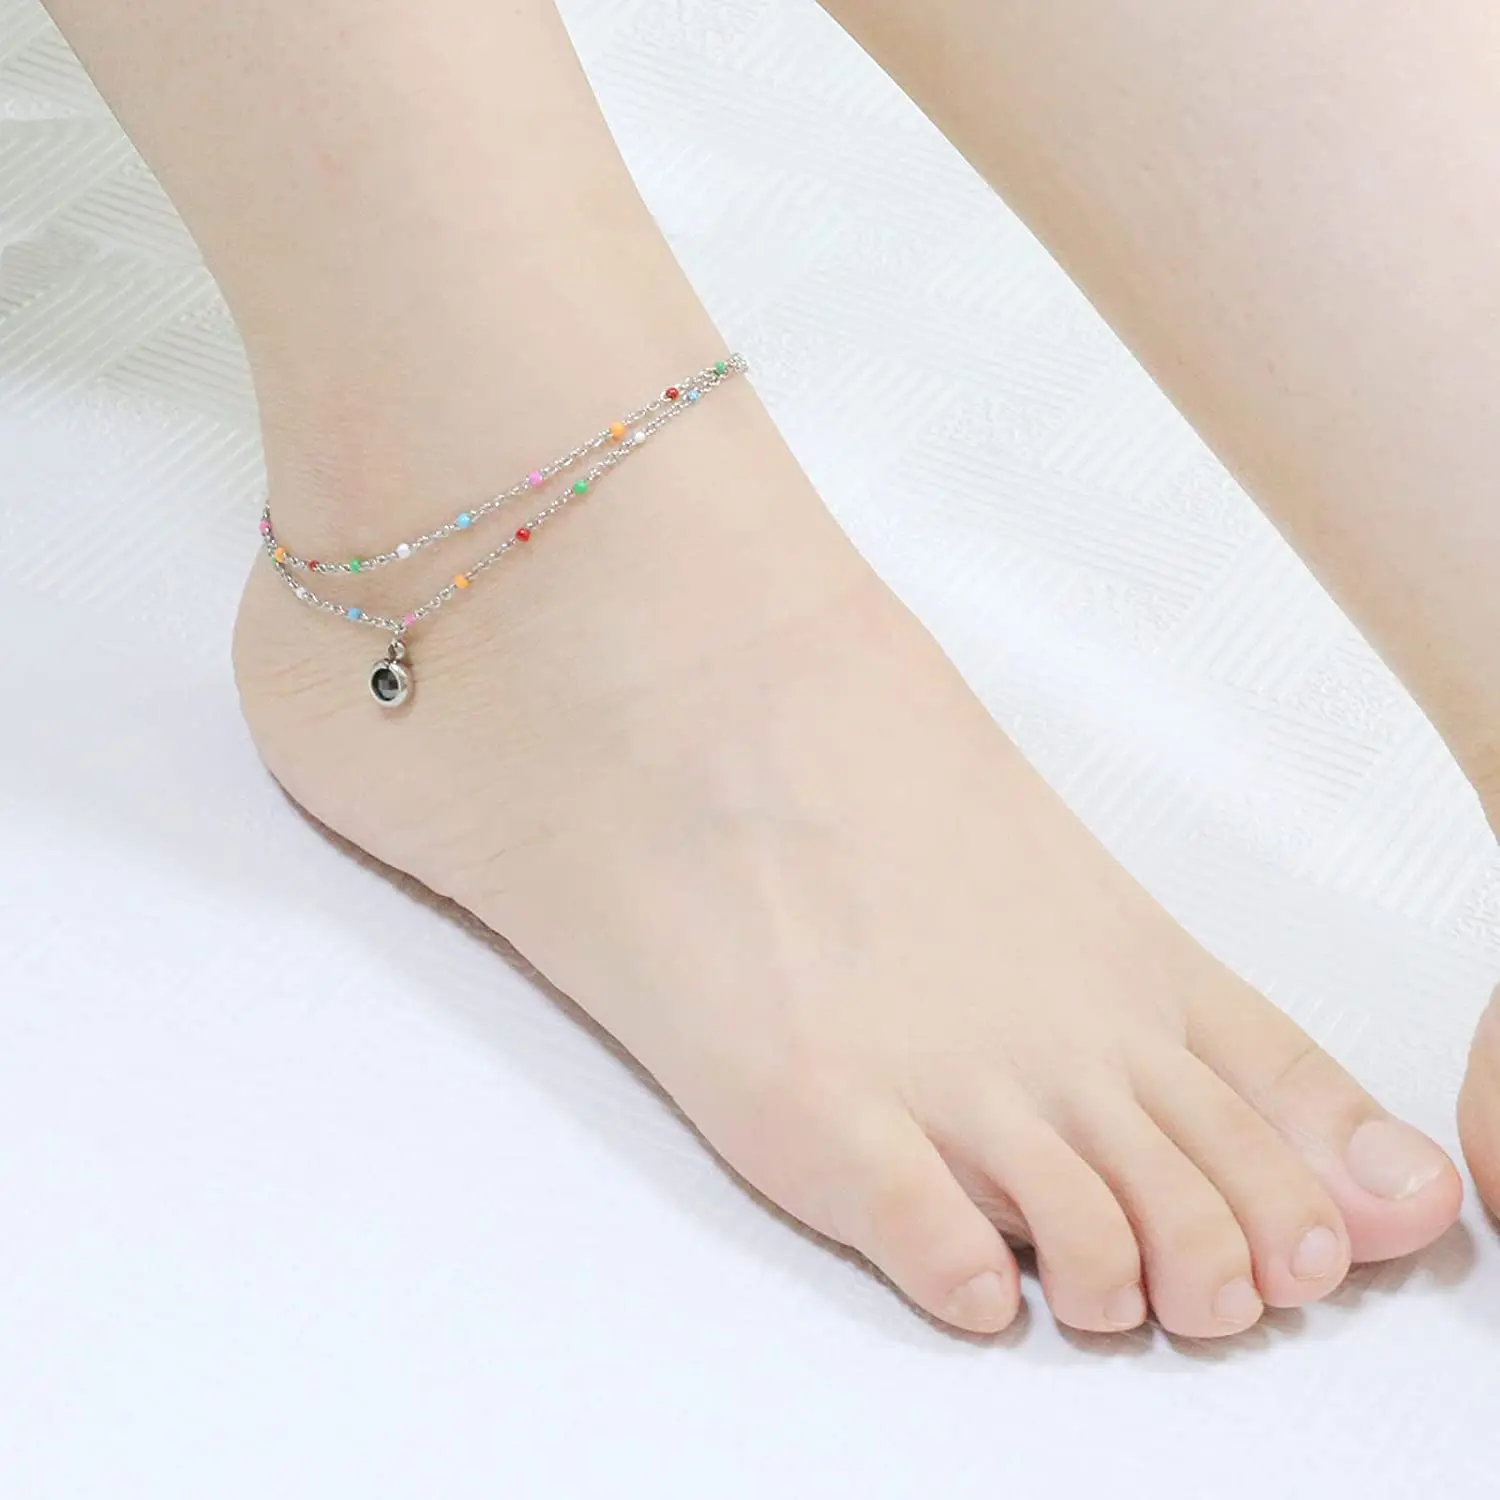 Crystal Stainless Steel Anklet Color Beaded Dainty Hanging Bells Cute Charm Adjustable Beach Double Layer Foot Chain for Women Teen Girls 